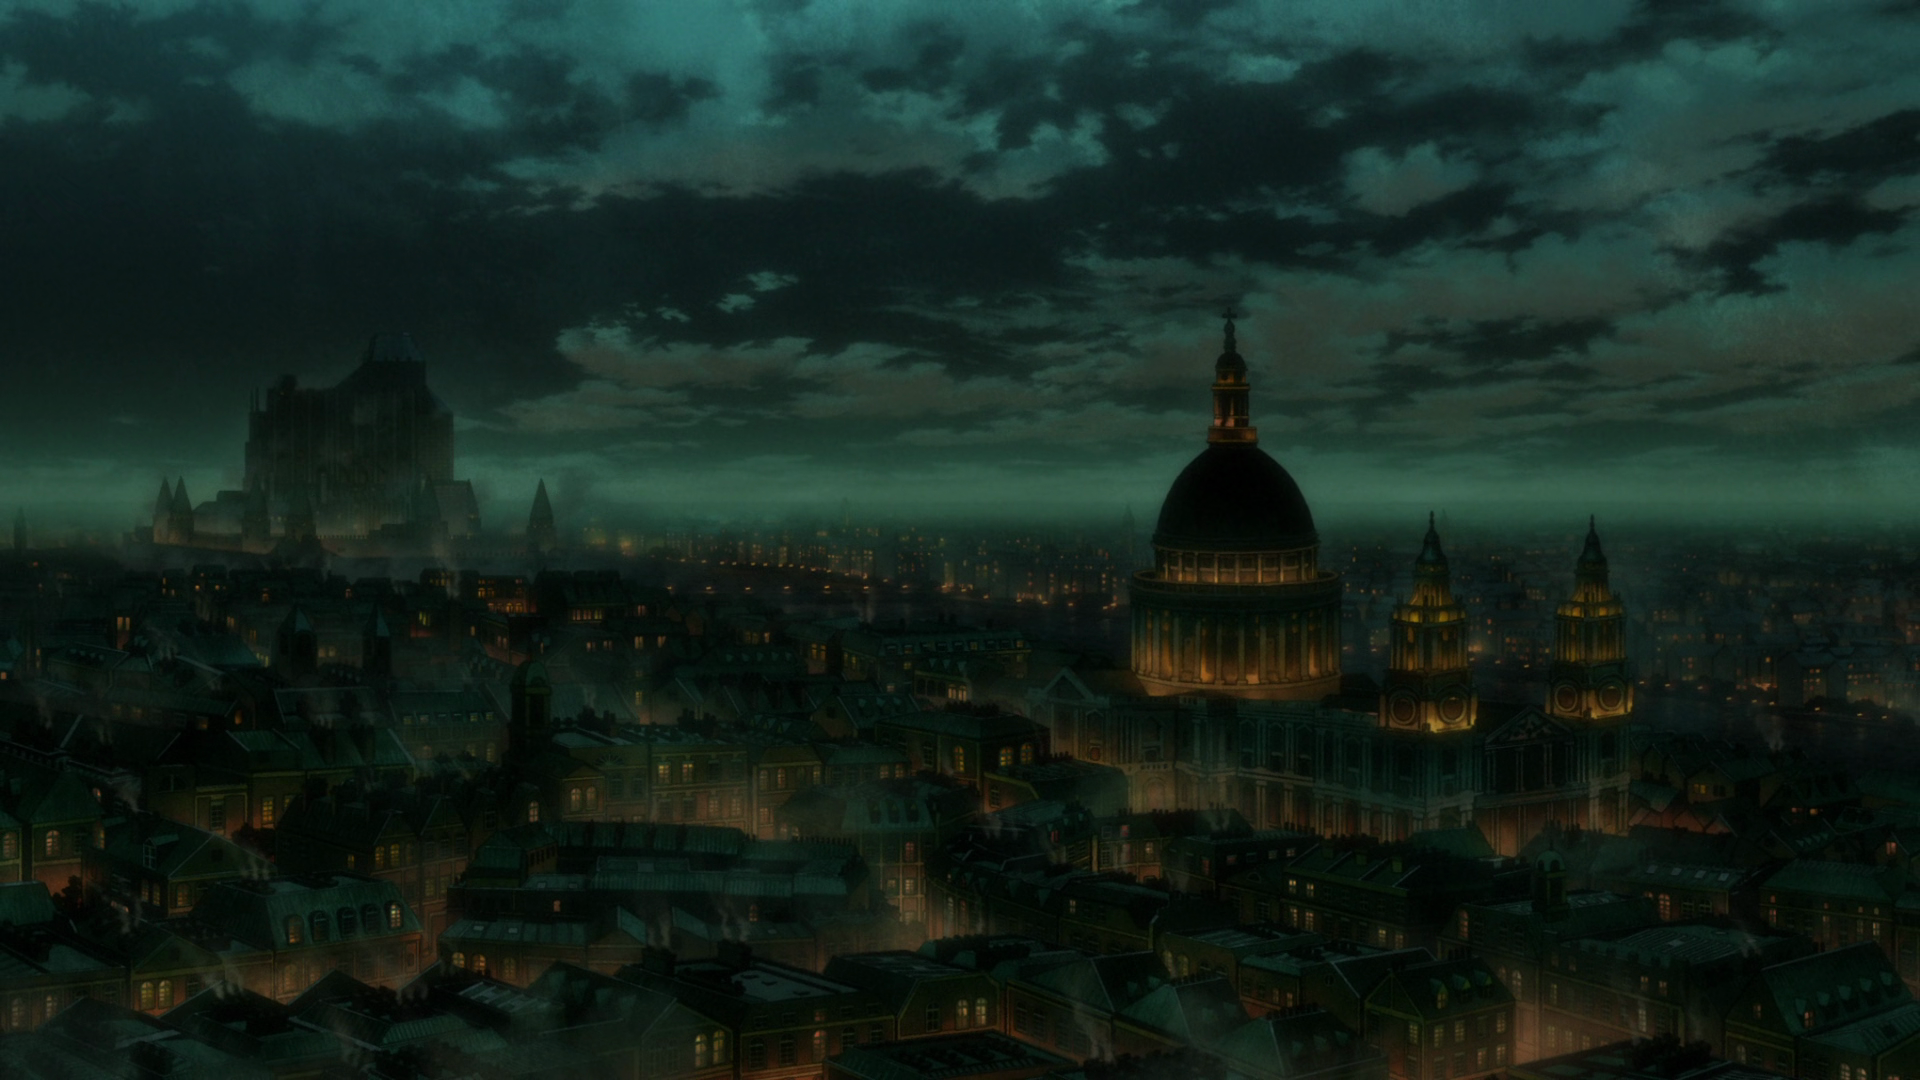 General 1920x1080 London Empire of the dead night clouds sky artwork cityscape city lights